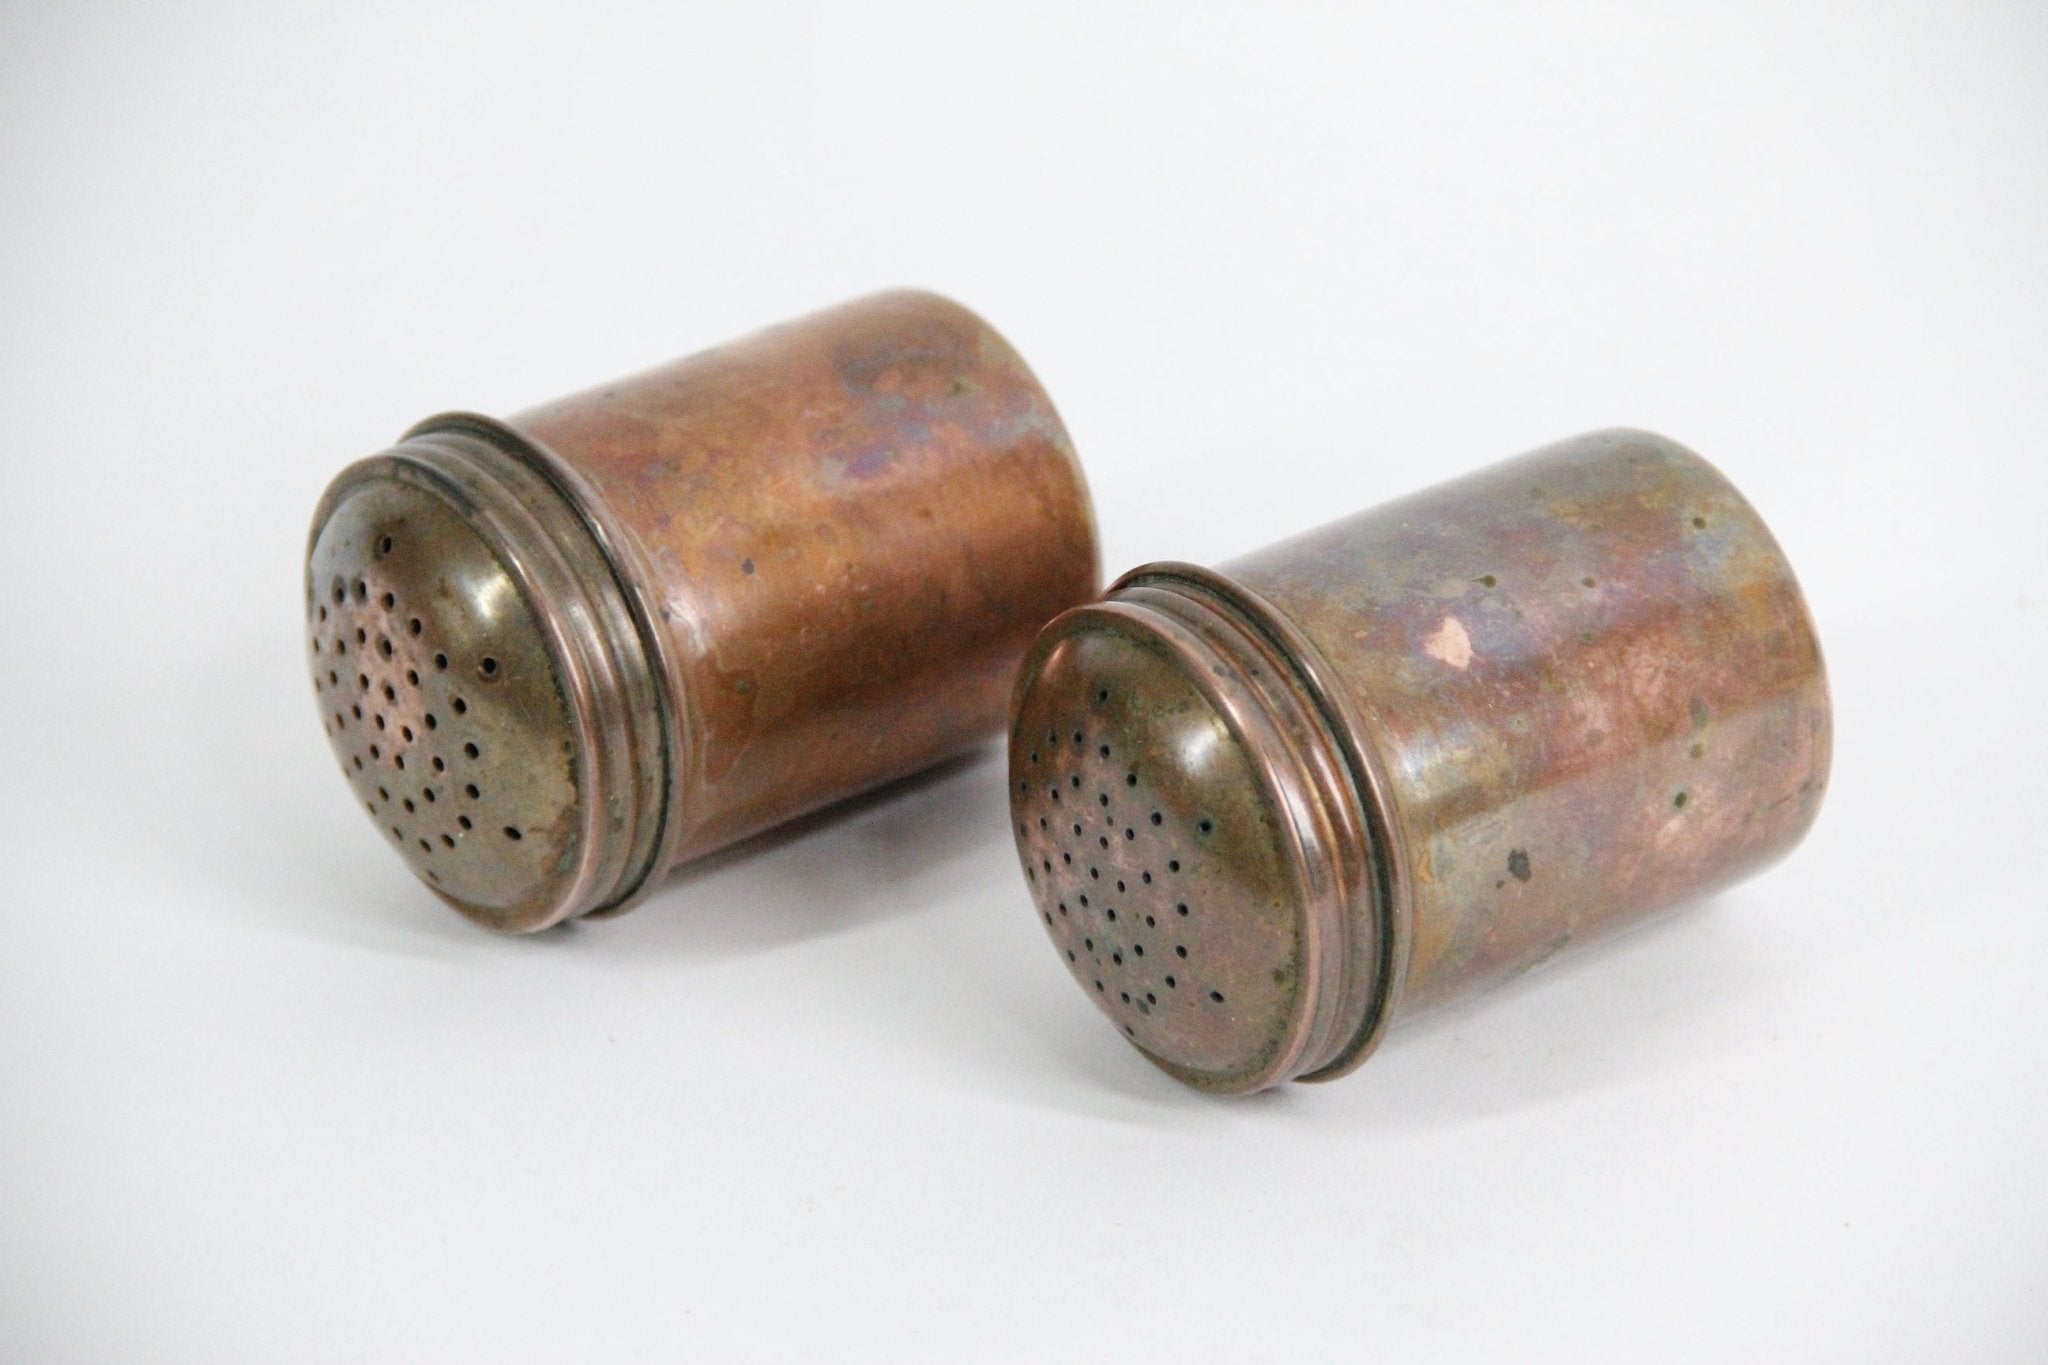 Antique Copper Salt and Pepper Shakers - Debra Hall Lifestyle